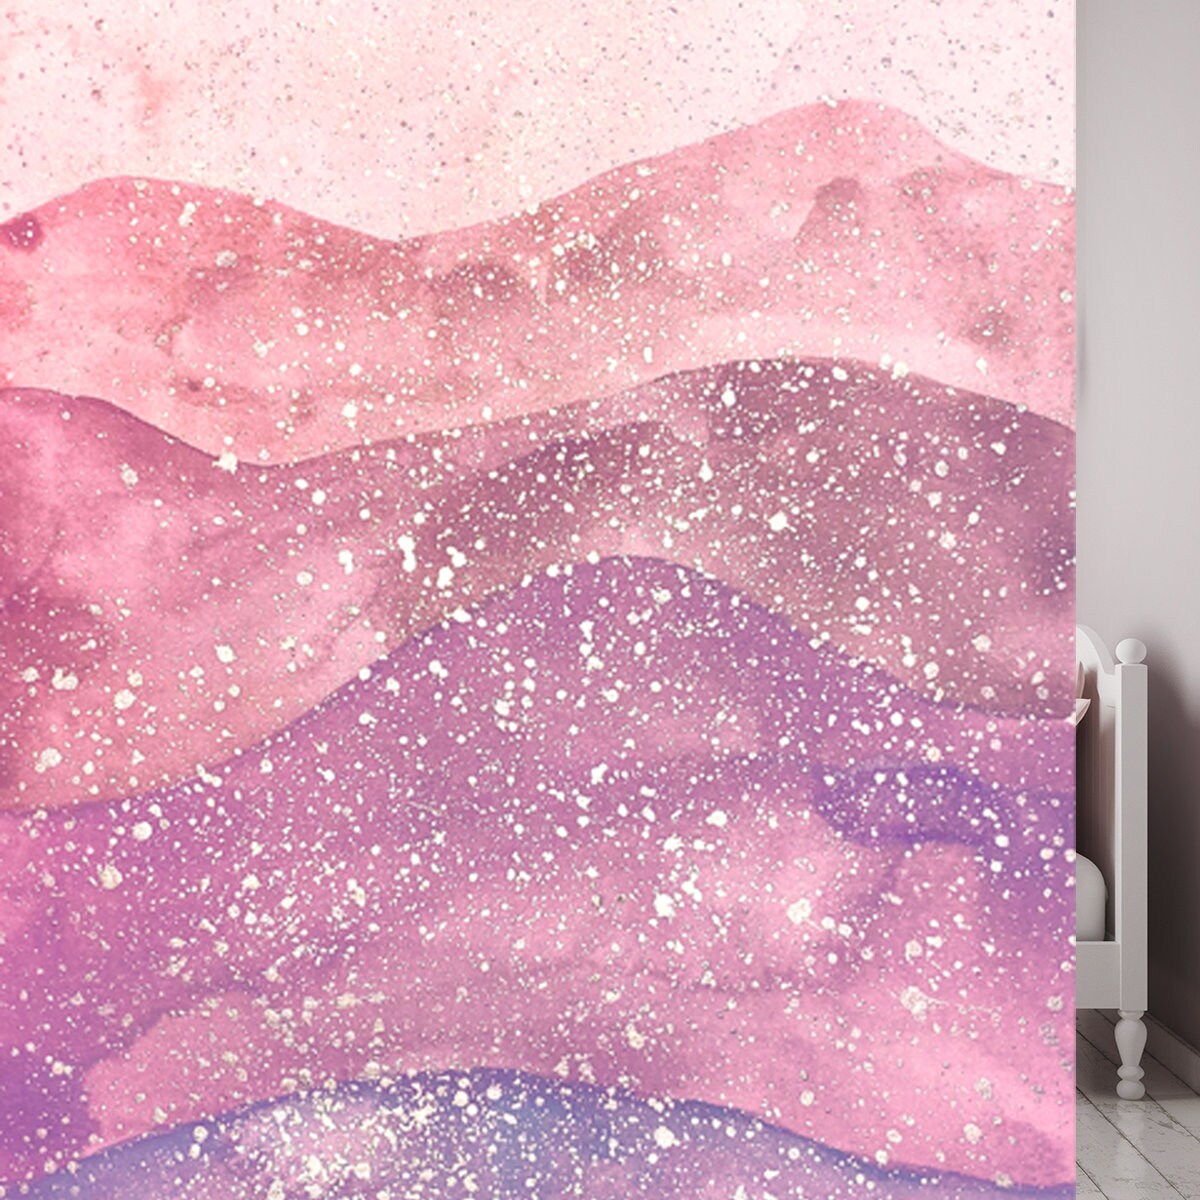 Mountain Print. Painted in Watercolors in Dusty Pink with Gold Sparkles Wallpaper Girls Bedroom Mural